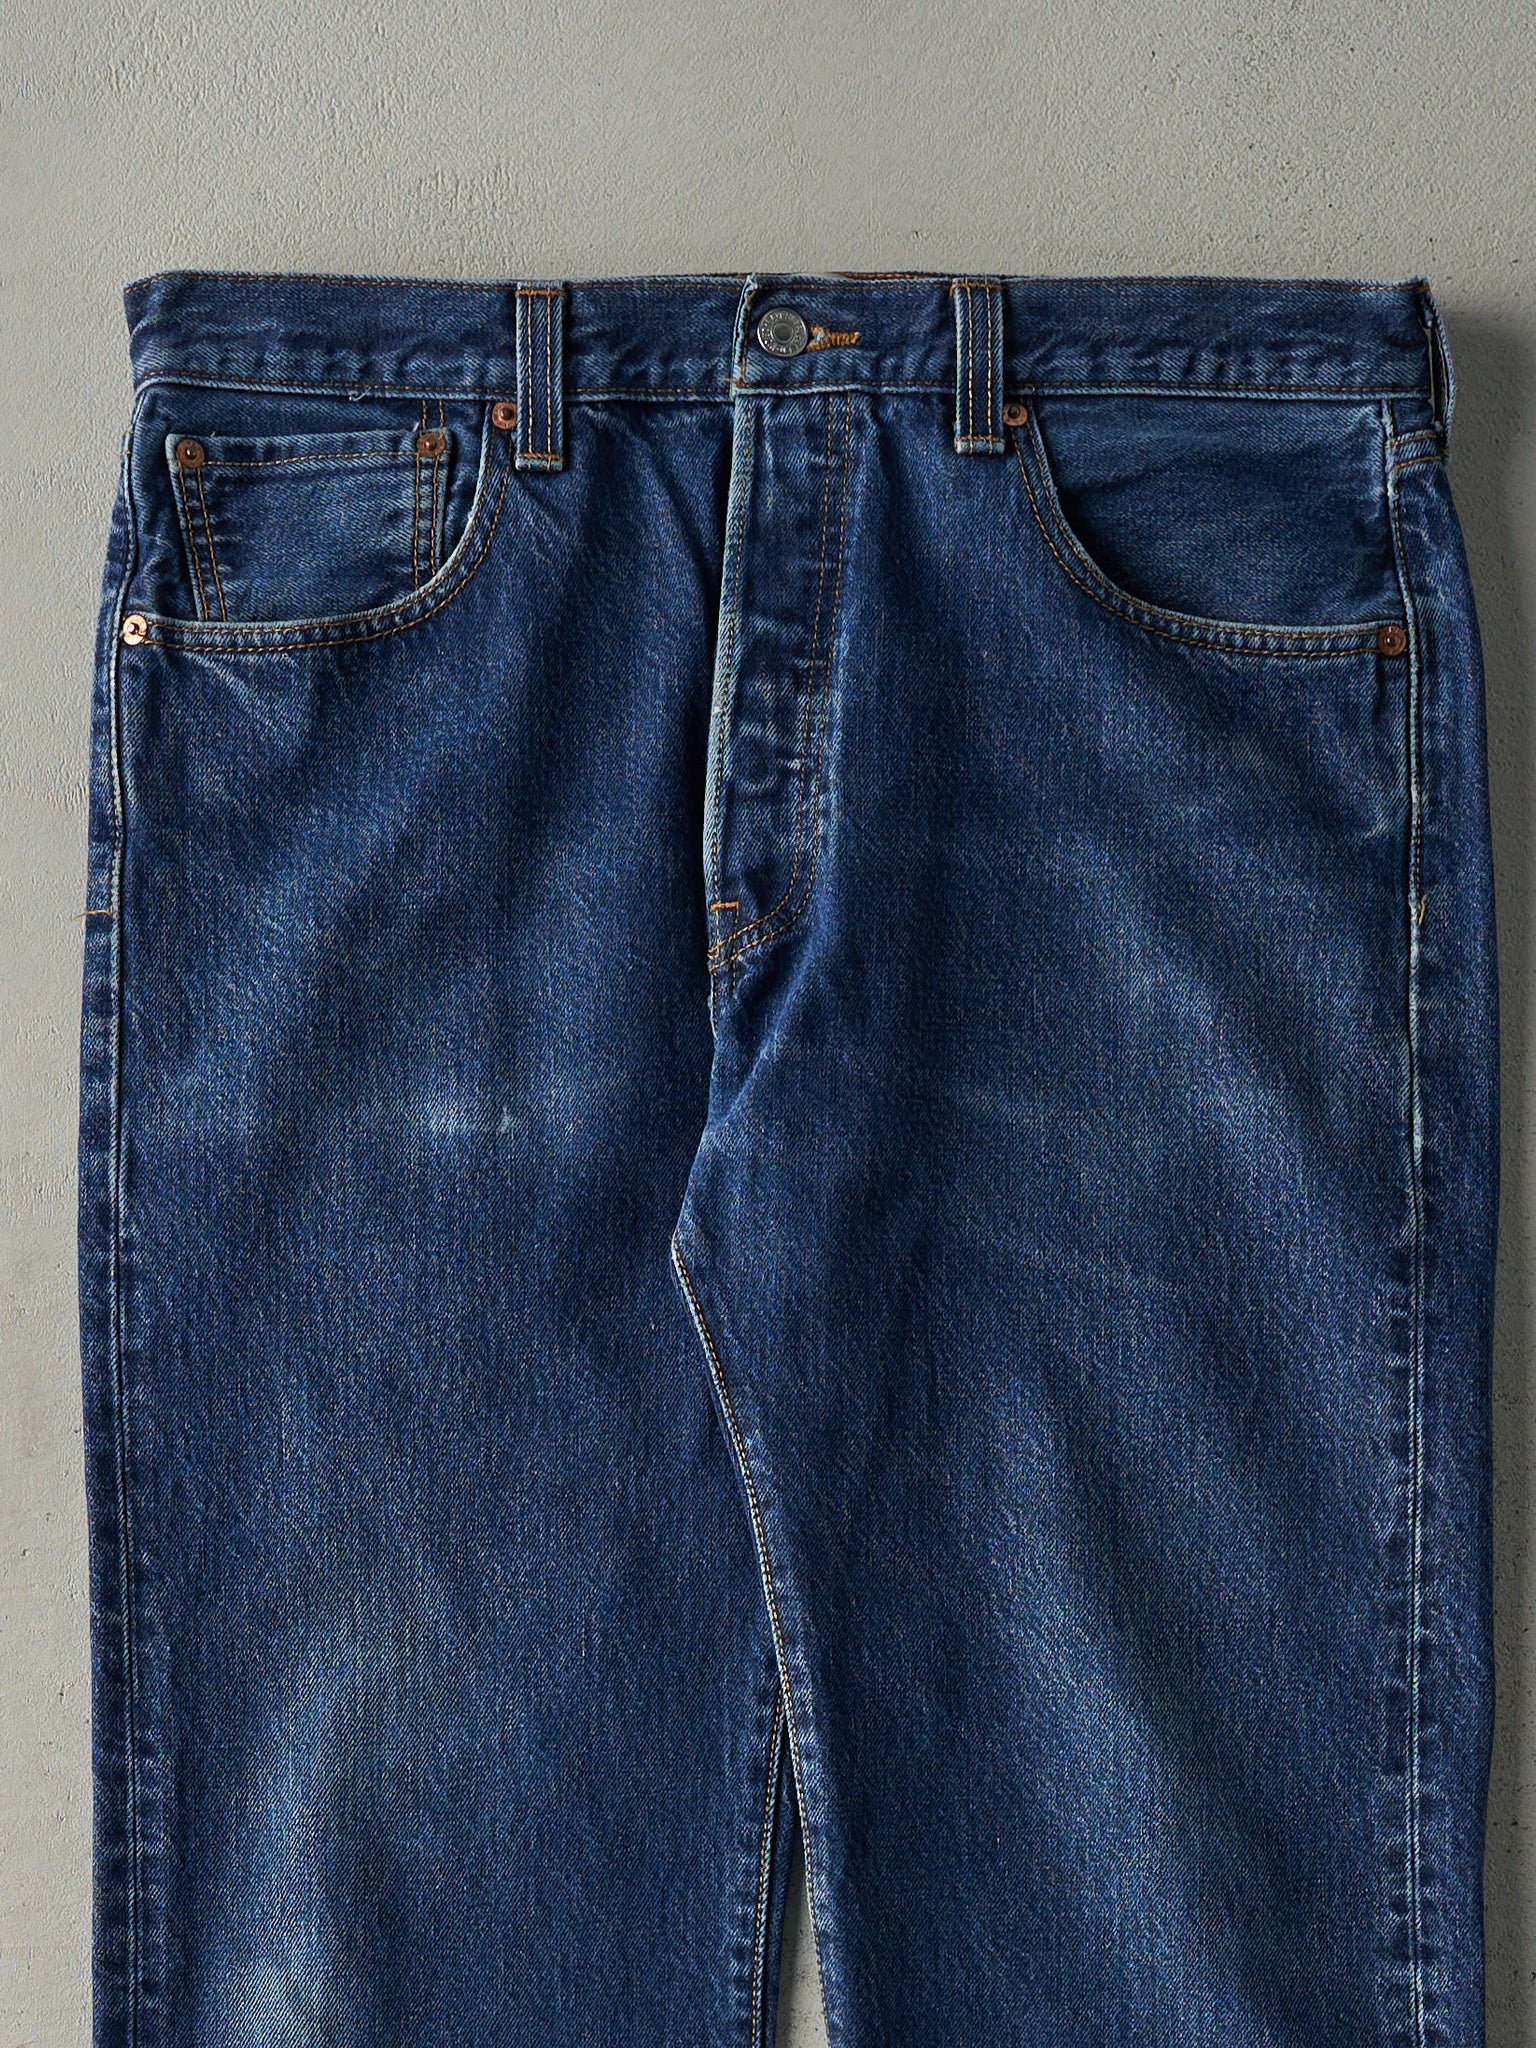 Vintage Y2K Faded Mid Wash Levi's 501 Jeans (34x30)